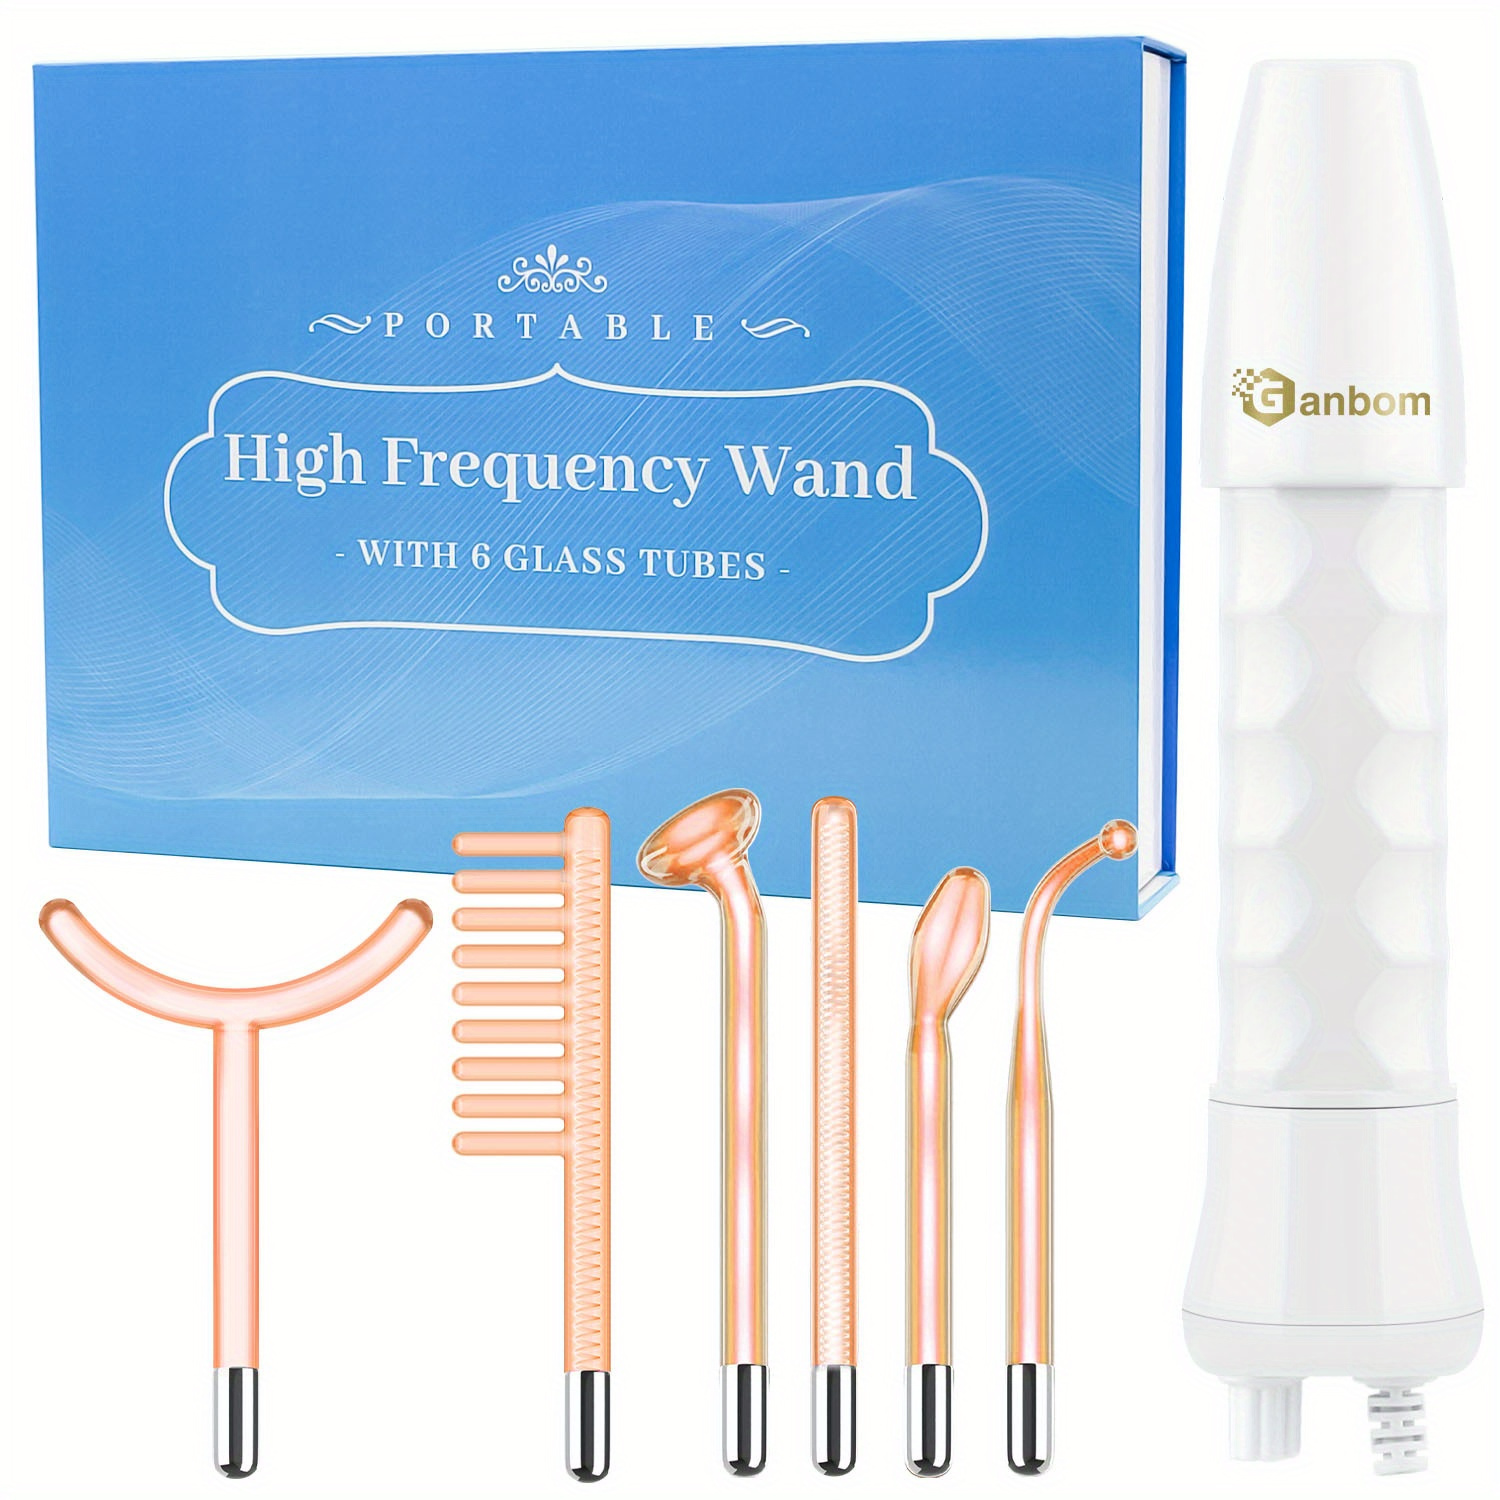 

High Frequency Facial Wand - Uaike 6 In 1 Portable Handheld High Frequency Facial Machine - With 6 Pcs Orange Glass Tubes At Home Face Skin Wand Device For Body/neck/hair/face